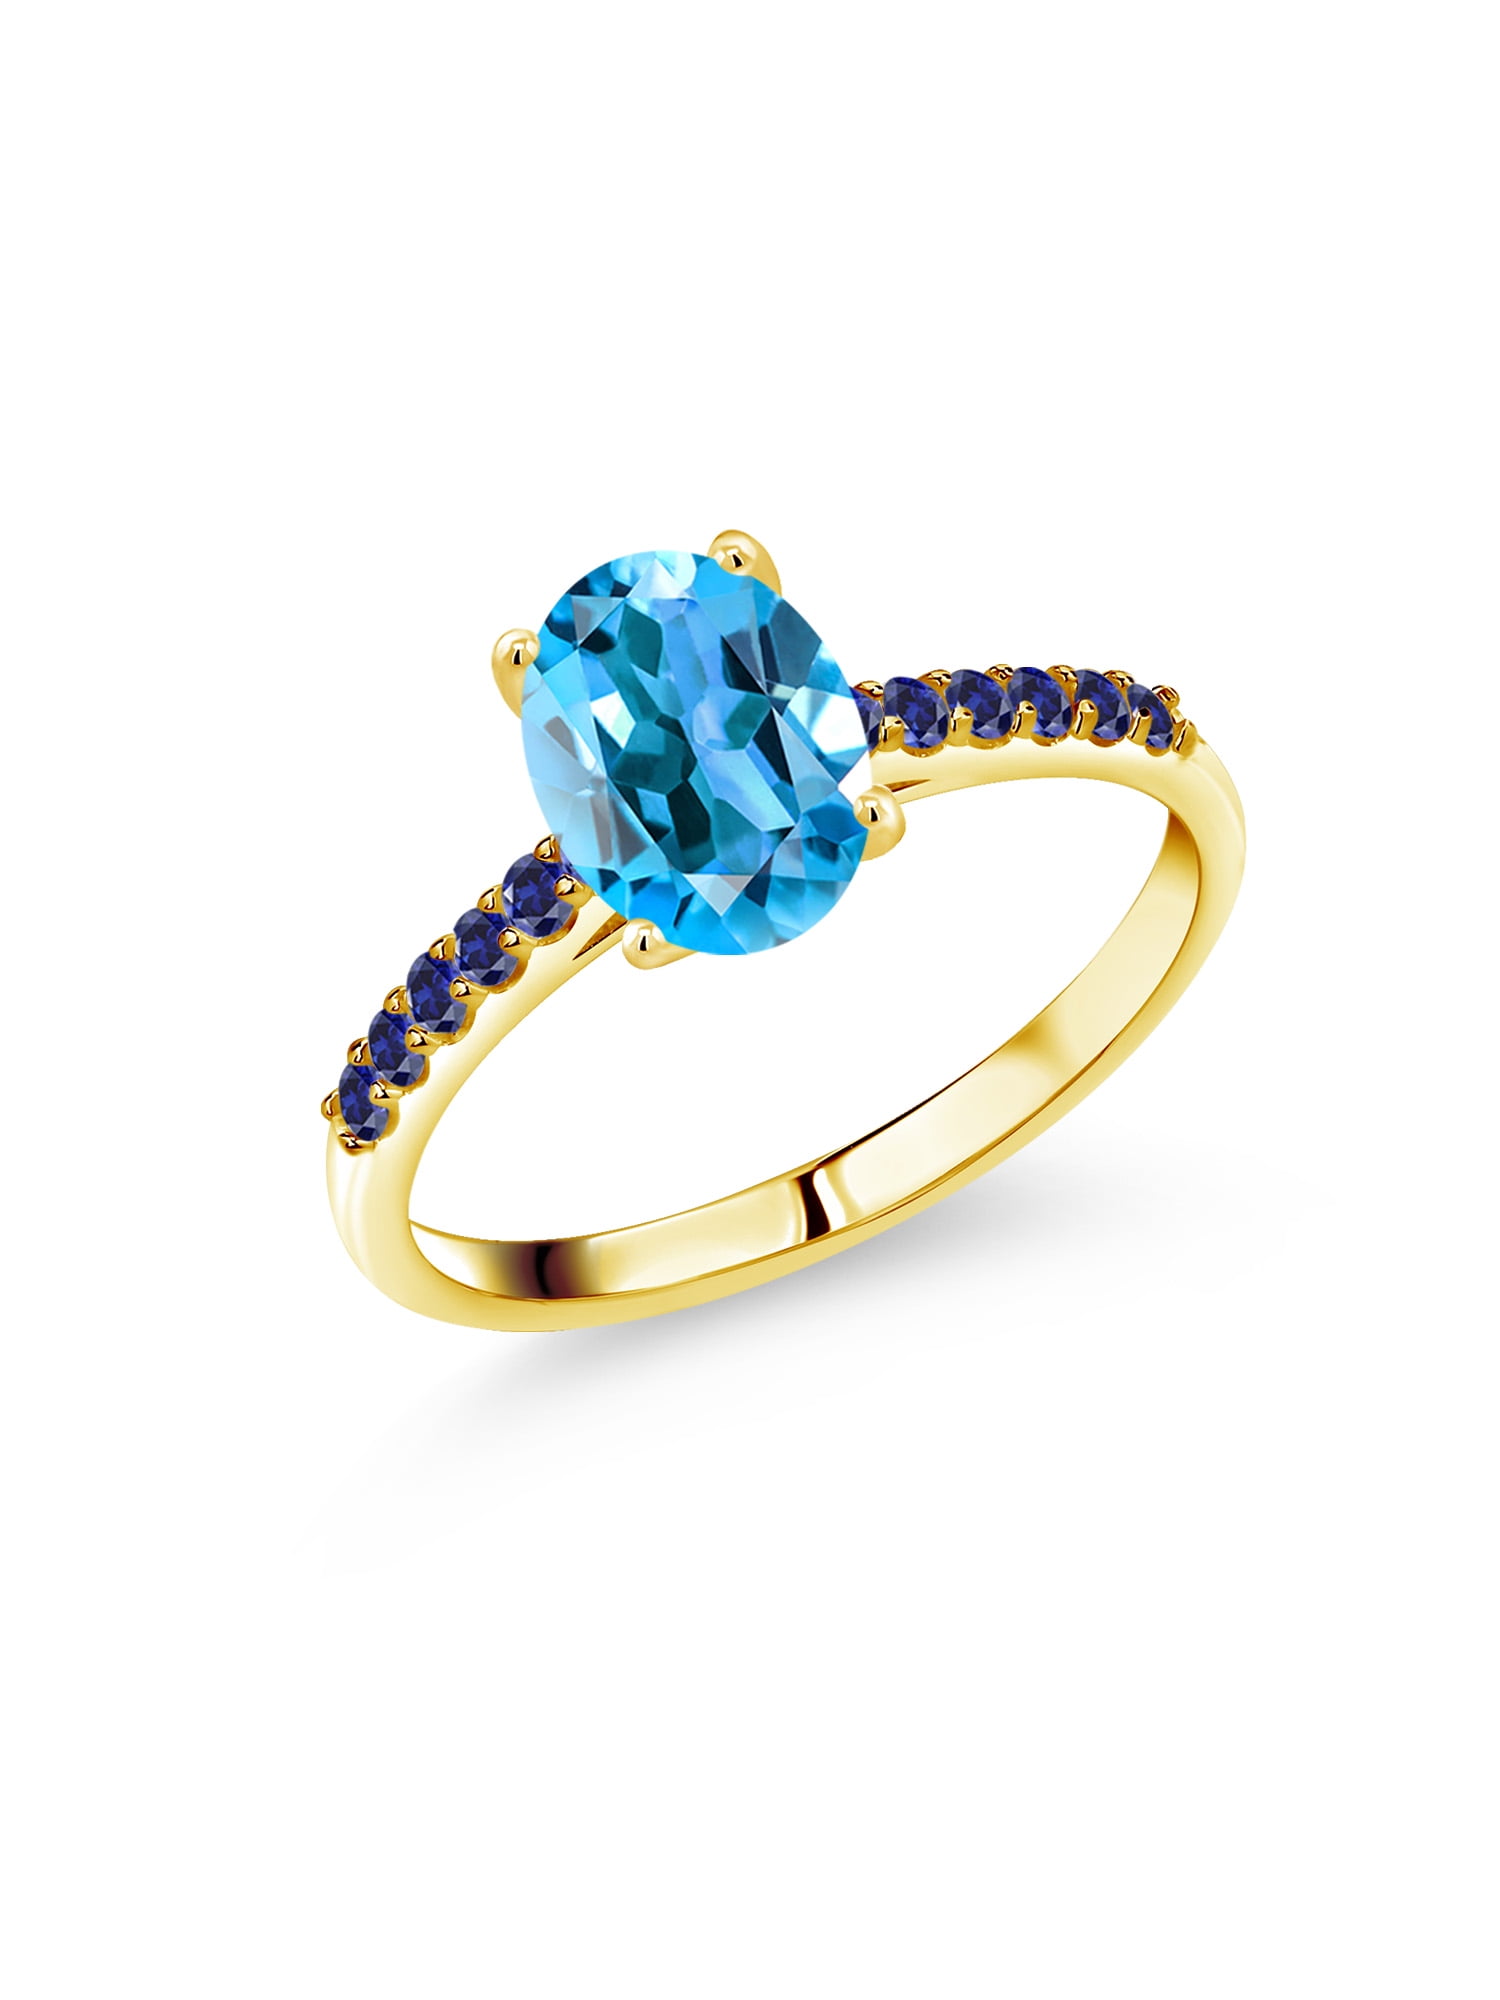 Gem Stone King 0.92 Ct Blue Created Sapphire White Topaz 925 Yellow Gold Plated Silver Ring 